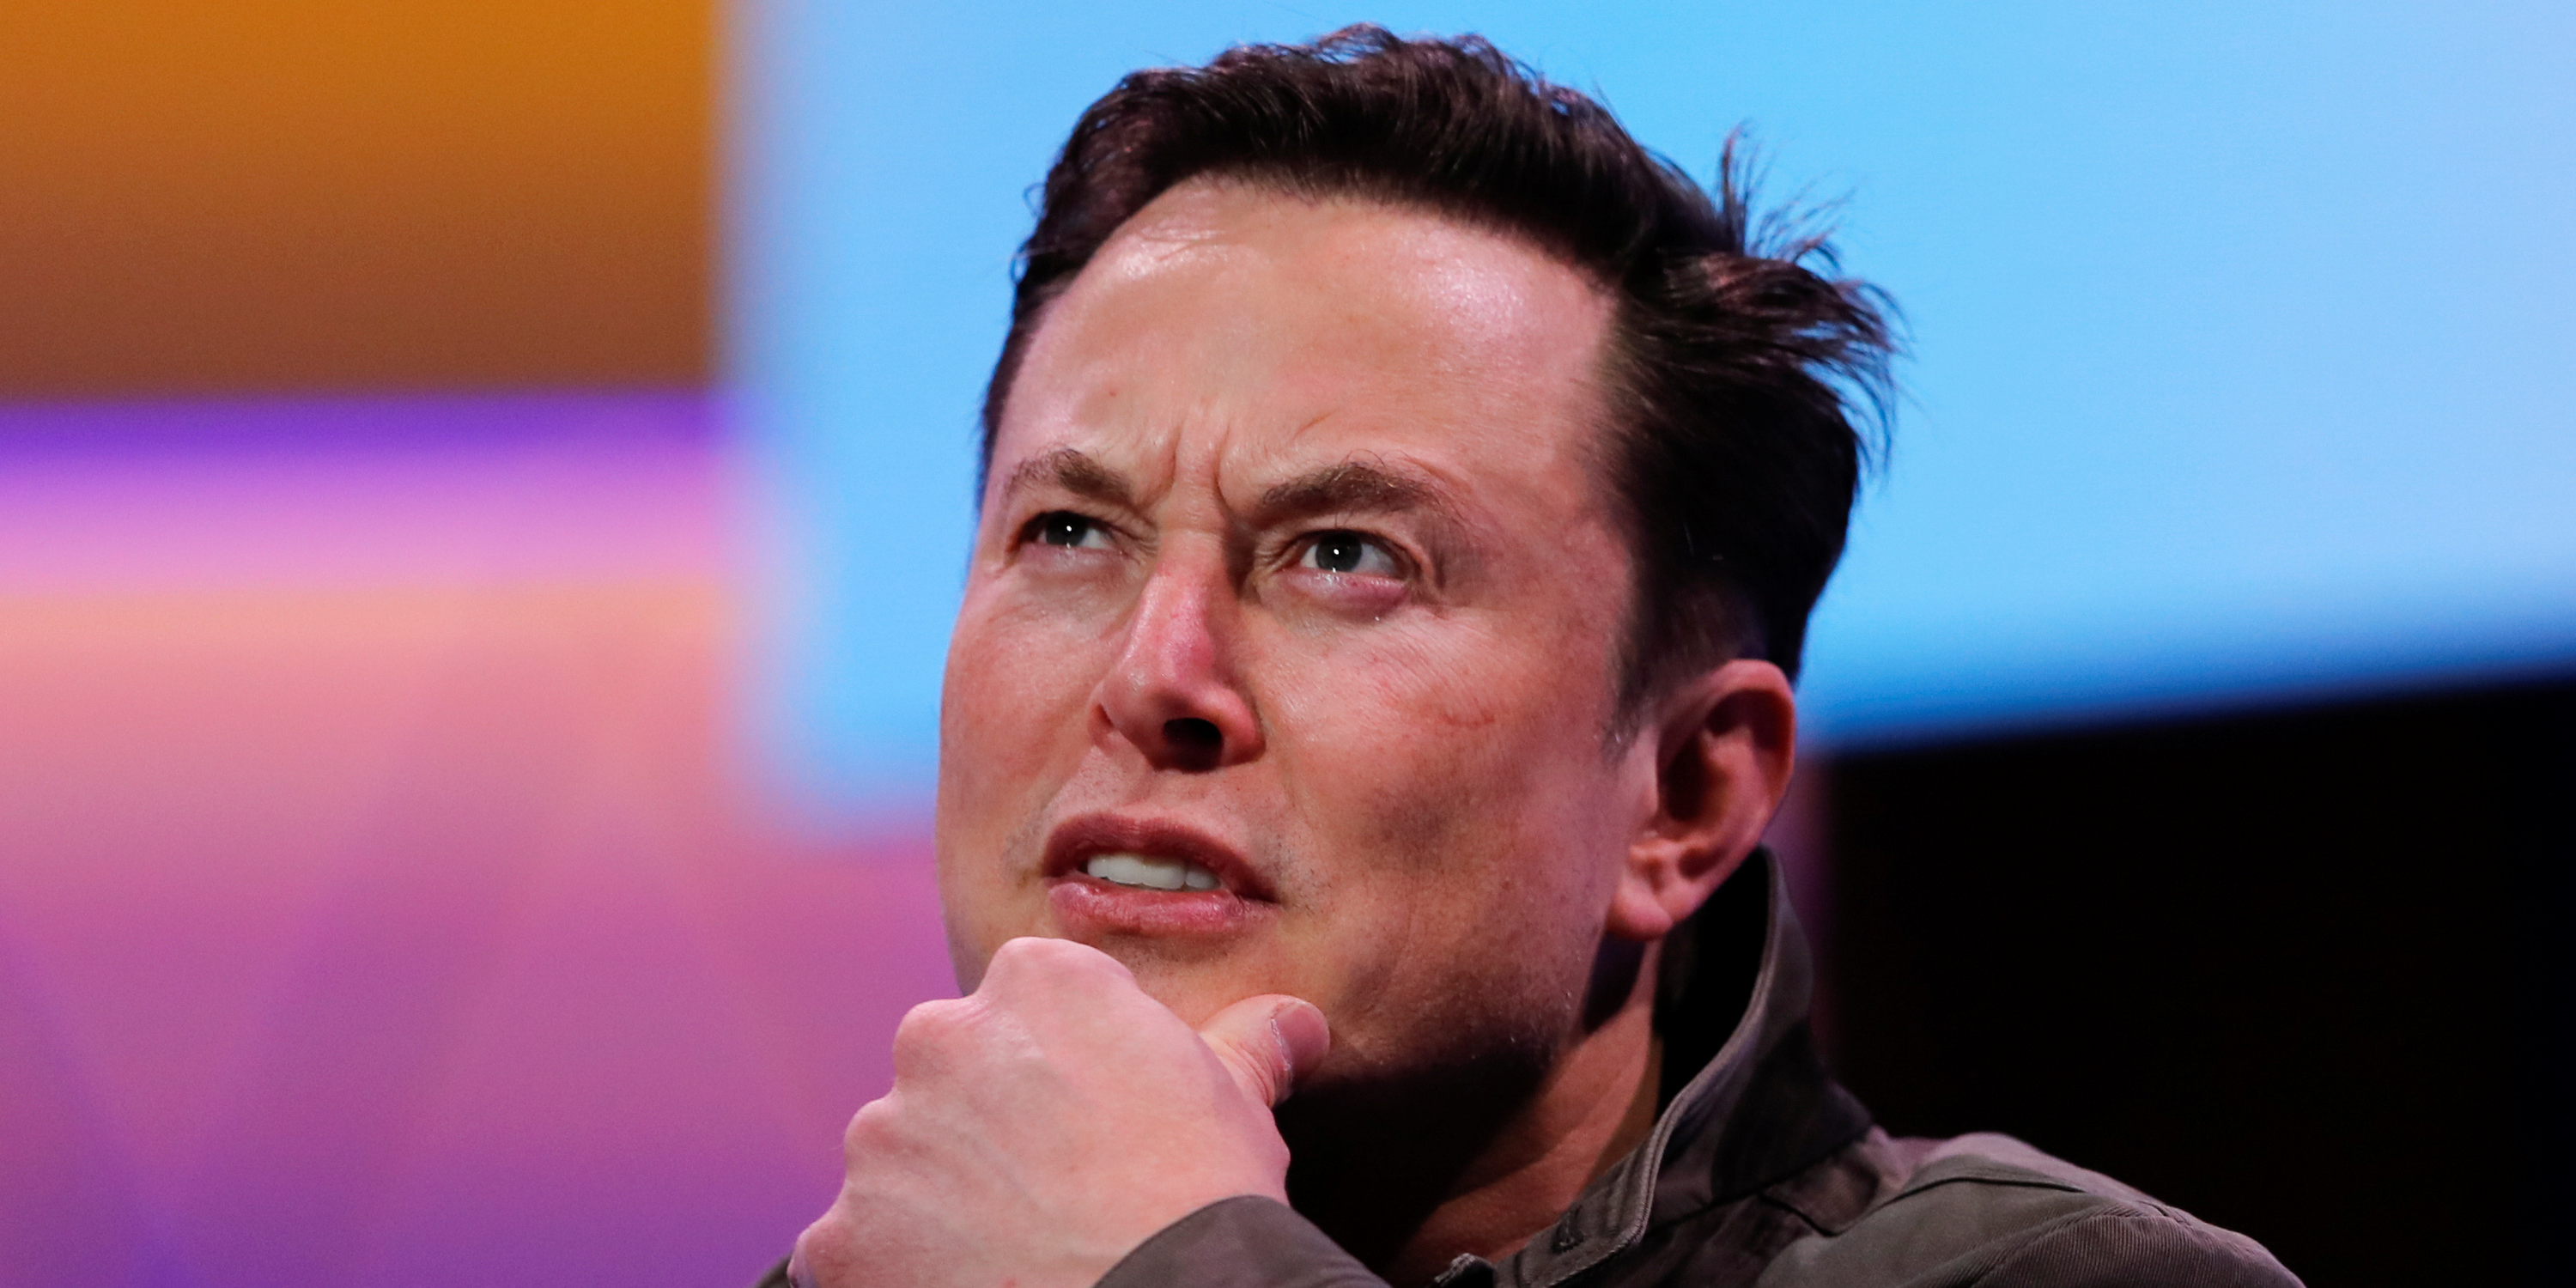 Elon Musk will defend himself in a defamation lawsuit brought by the British cave explorer Musk called a ‘pedo guy’ (TSLA)